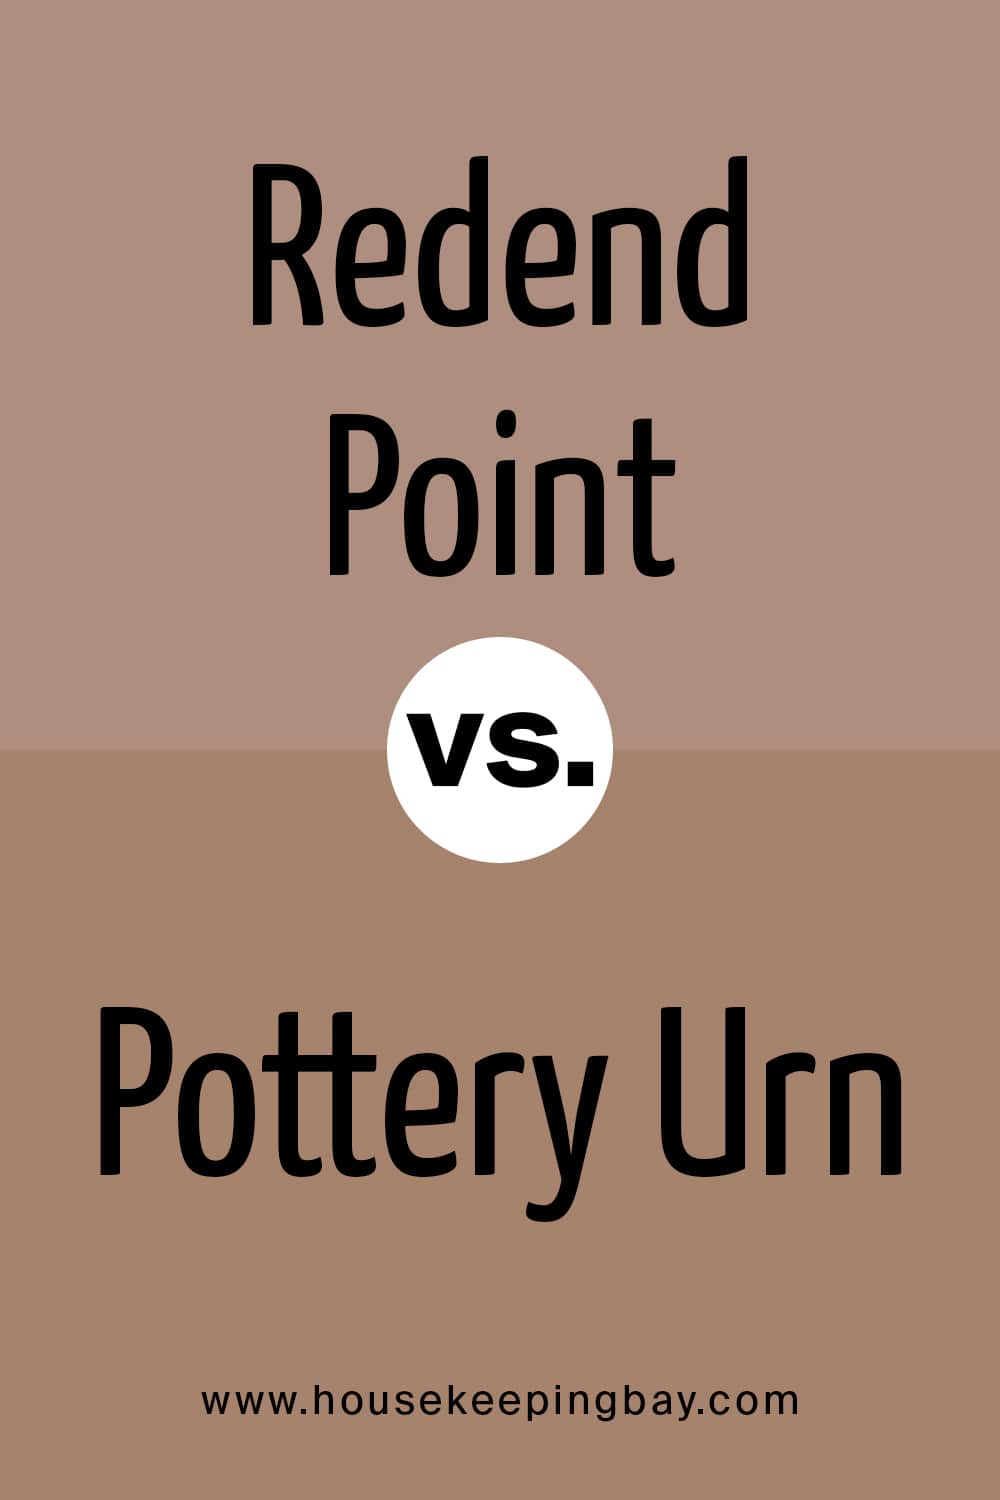 Redend Point VS Pottery Urn